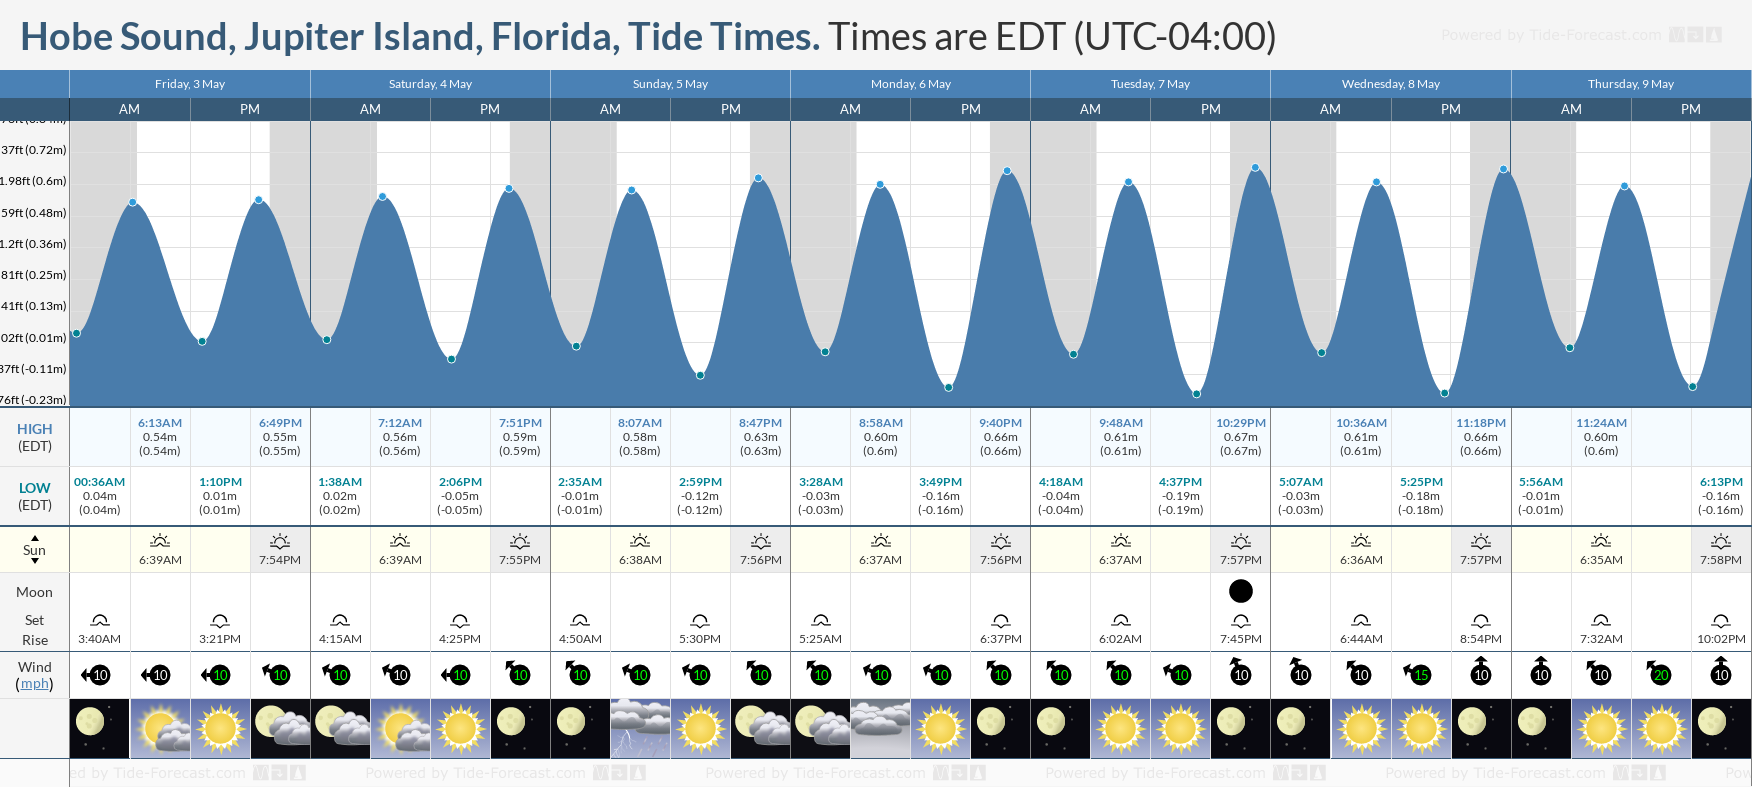 Hobe Sound, Jupiter Island, Florida Tide Chart including high and low tide tide times for the next 7 days